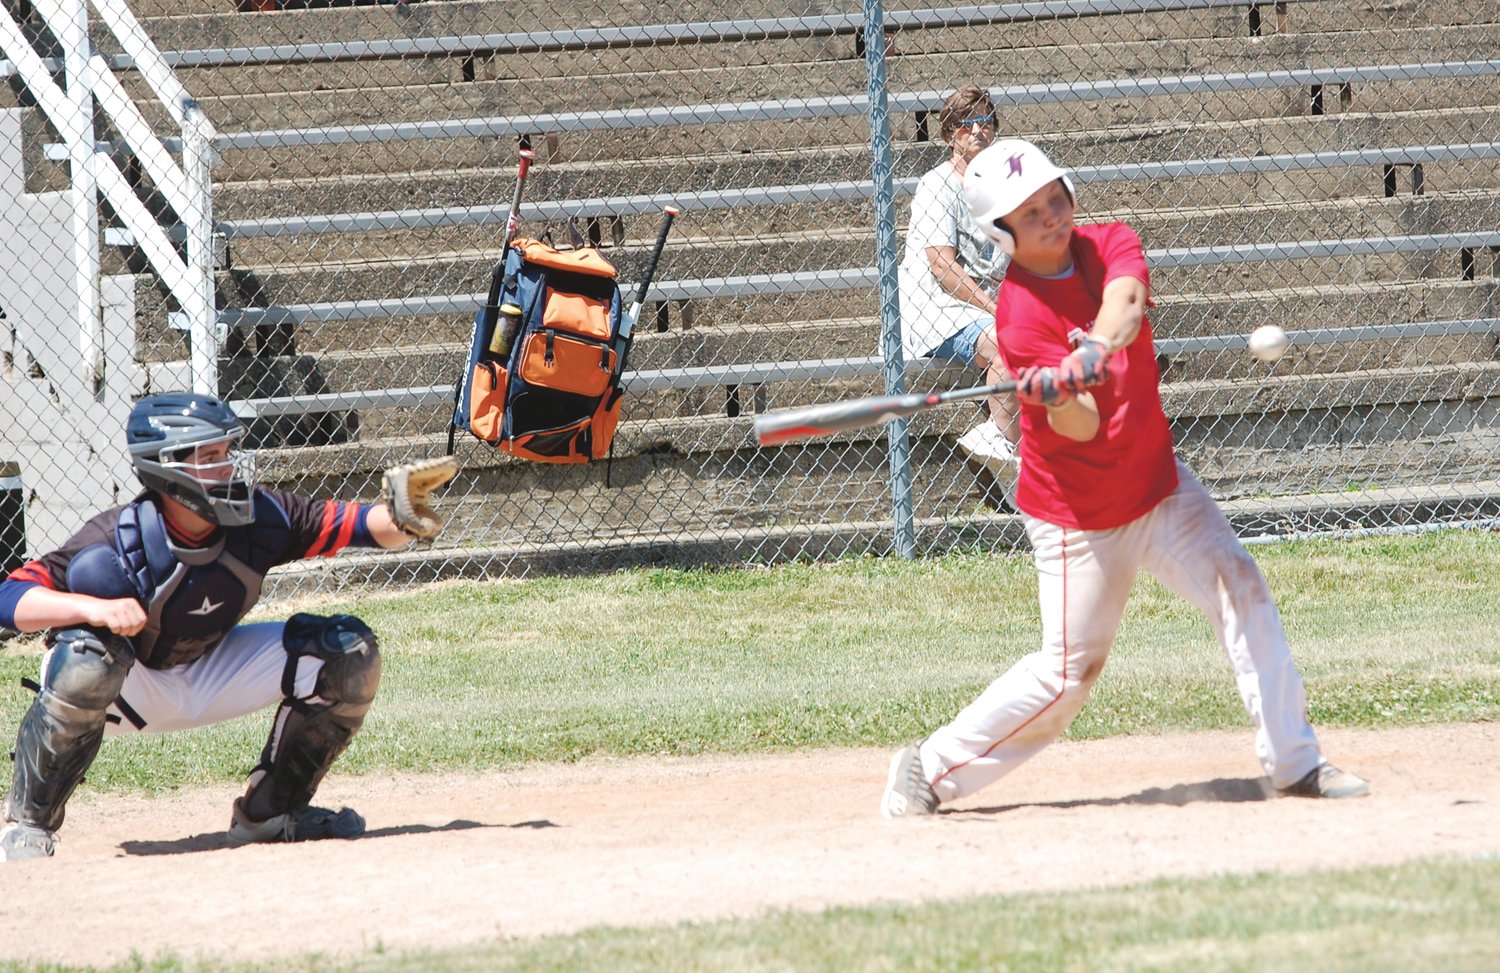 Austin Sulc connects on the game-winning hit for the Indiana Thunder 14U team against Harrison on Sunday afternoon at Baldwin Field.